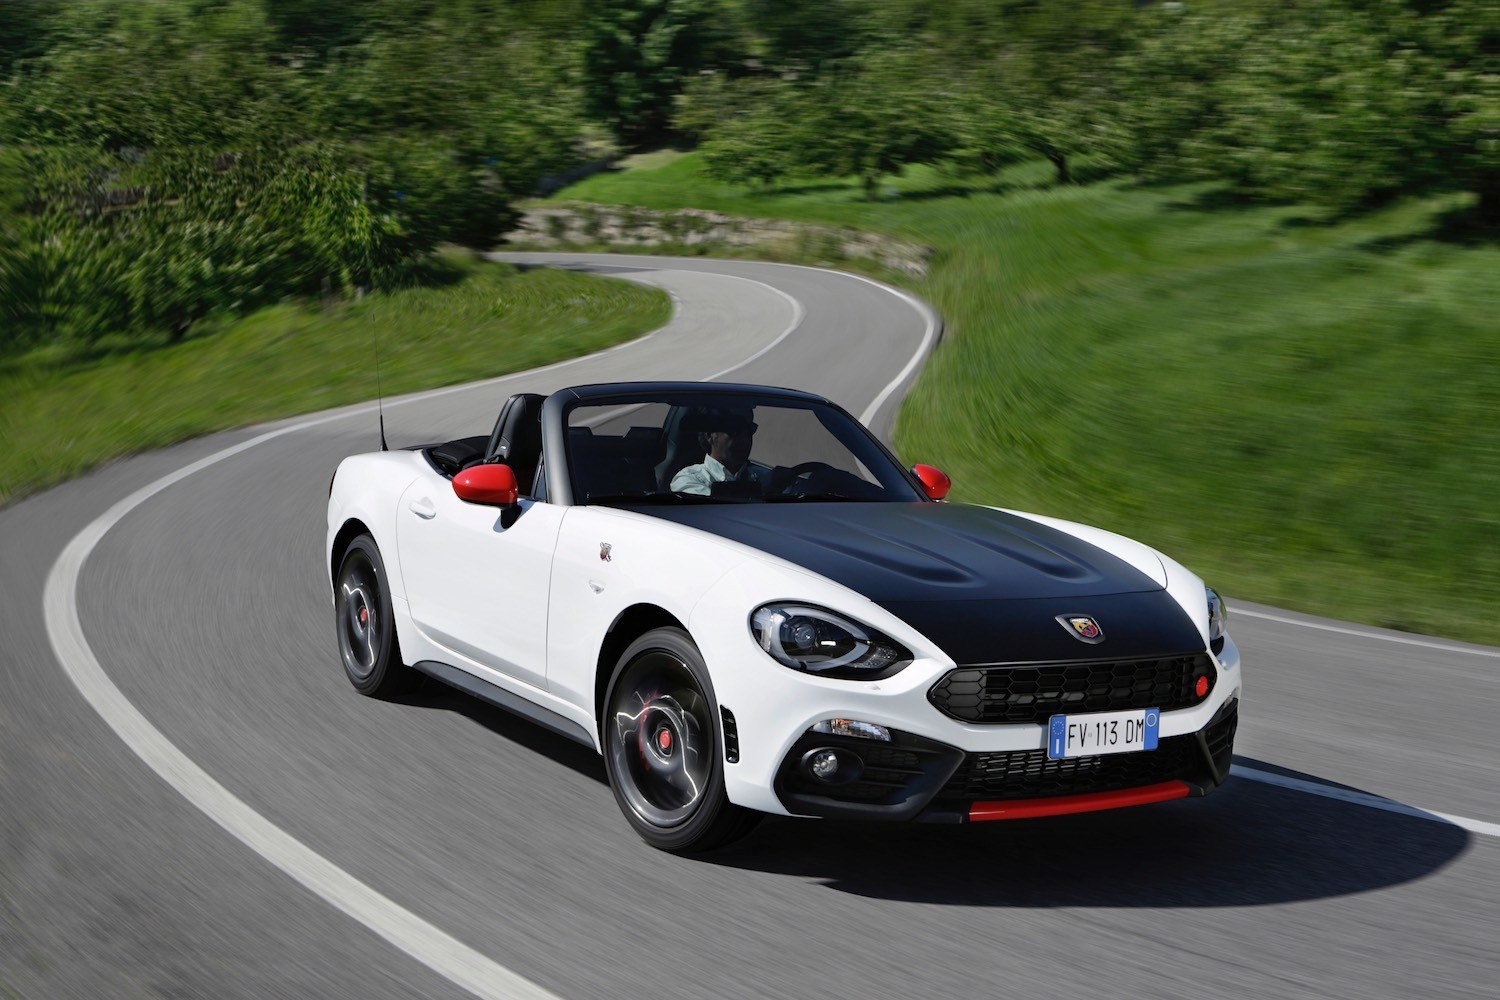 Jonathan Humphrey reviews the Abarth 124 Spider for Drive 12